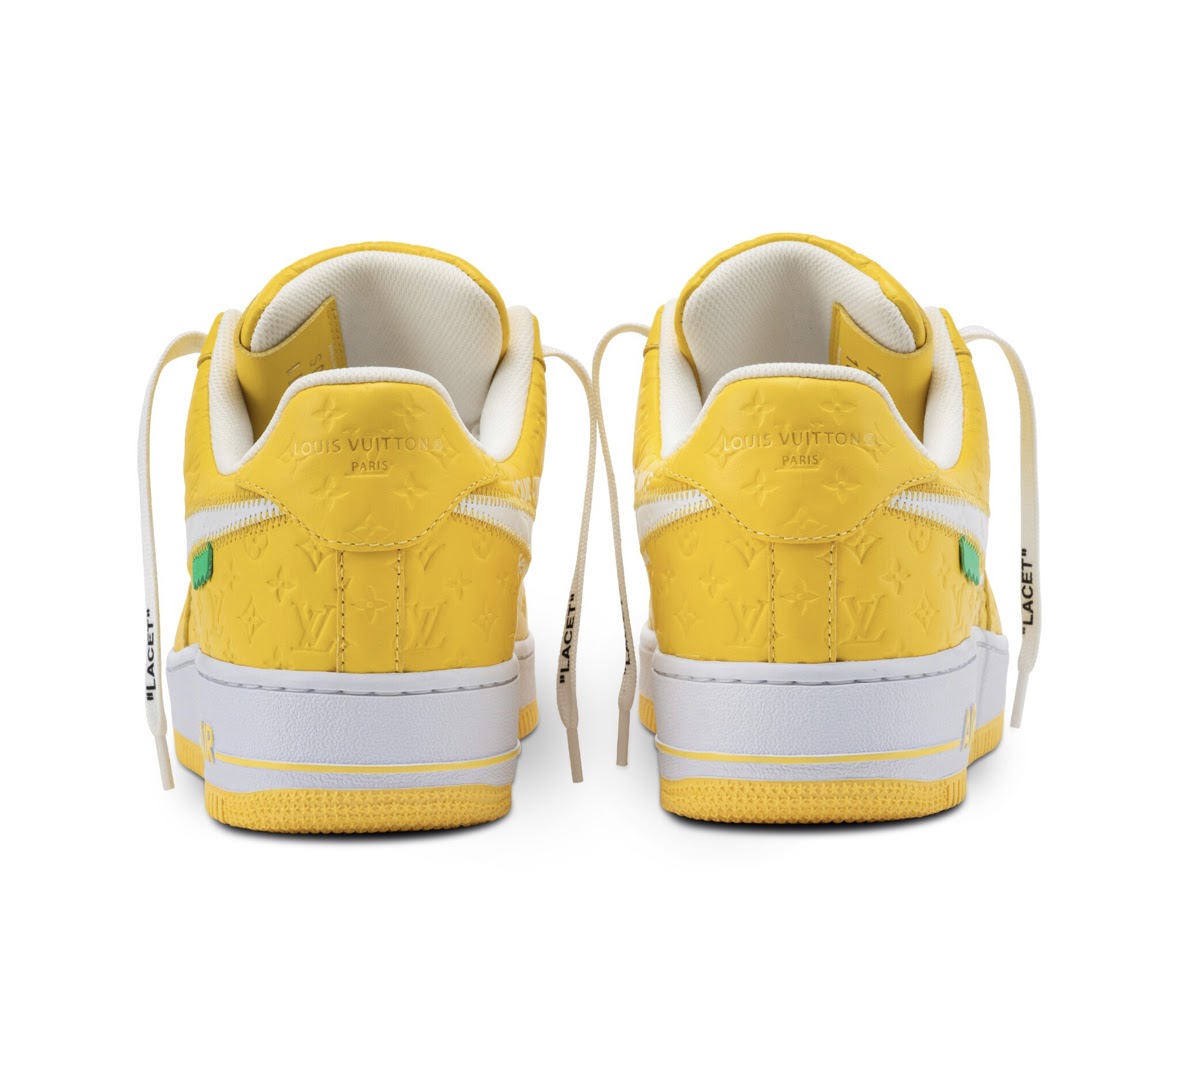 Up Close with the F&F Louis Vuitton x Nike Air Force 1 in Yellow